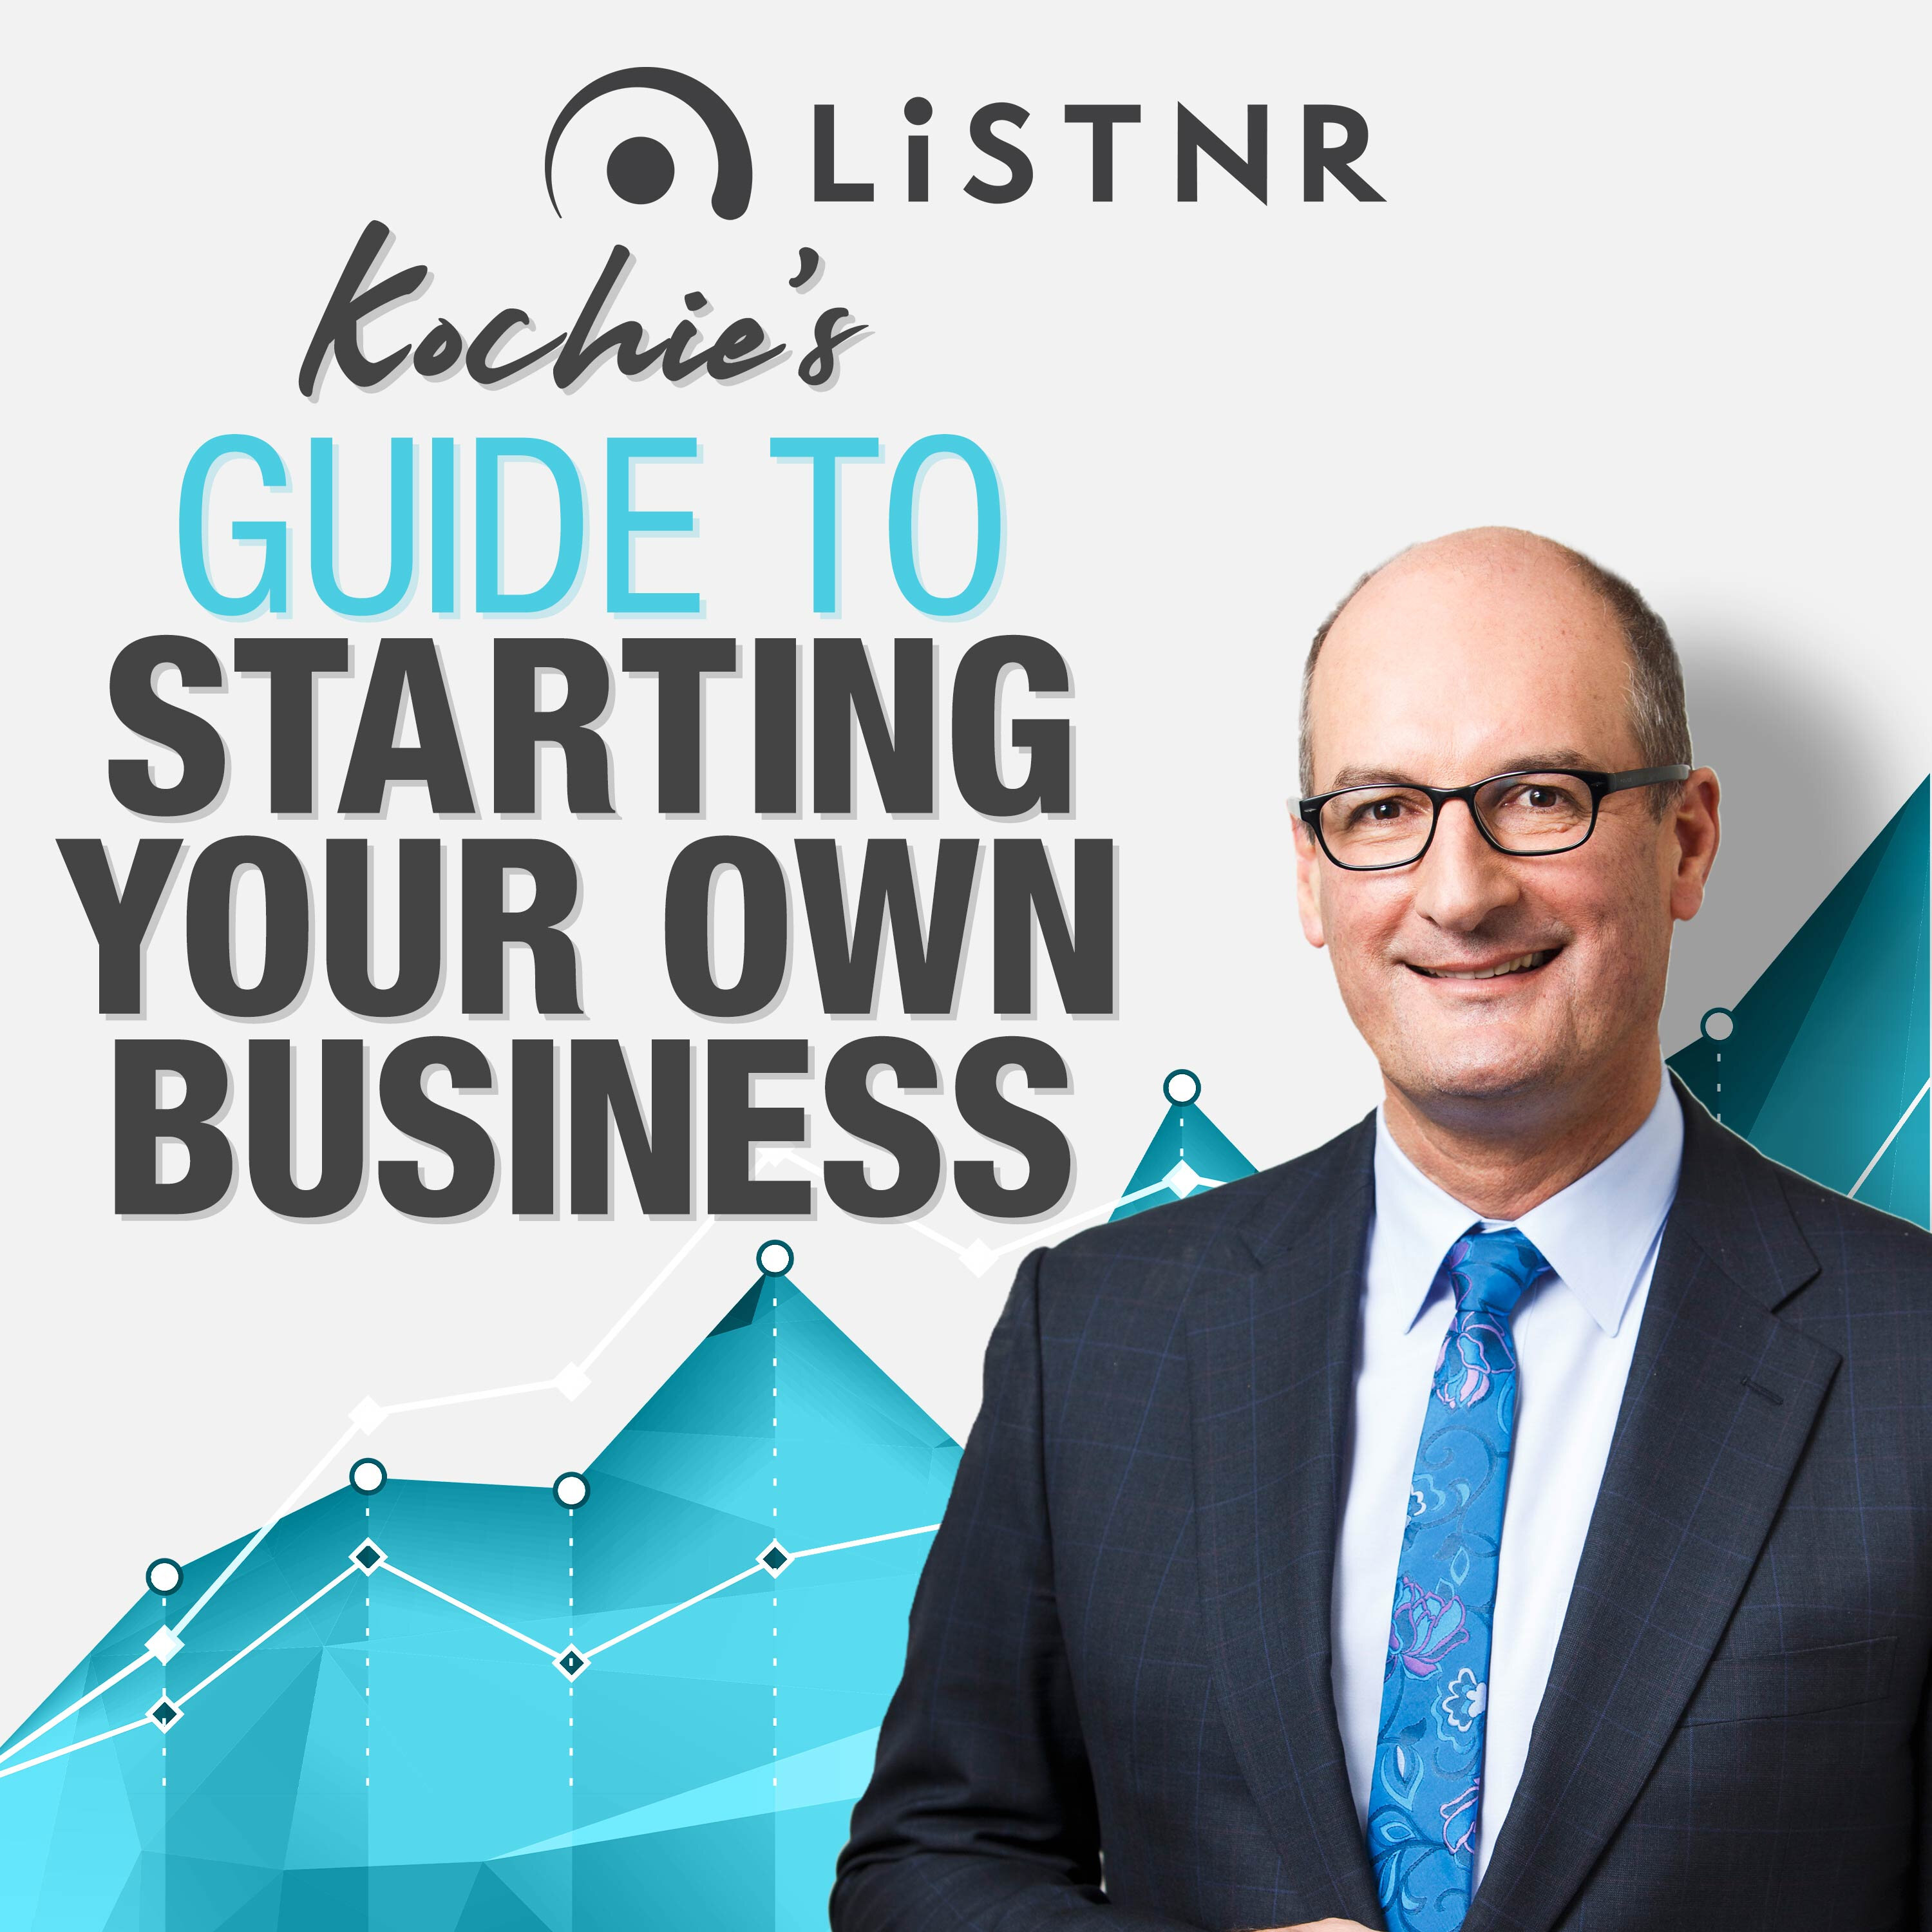 Kochie's Guide to Starting Your Own Business